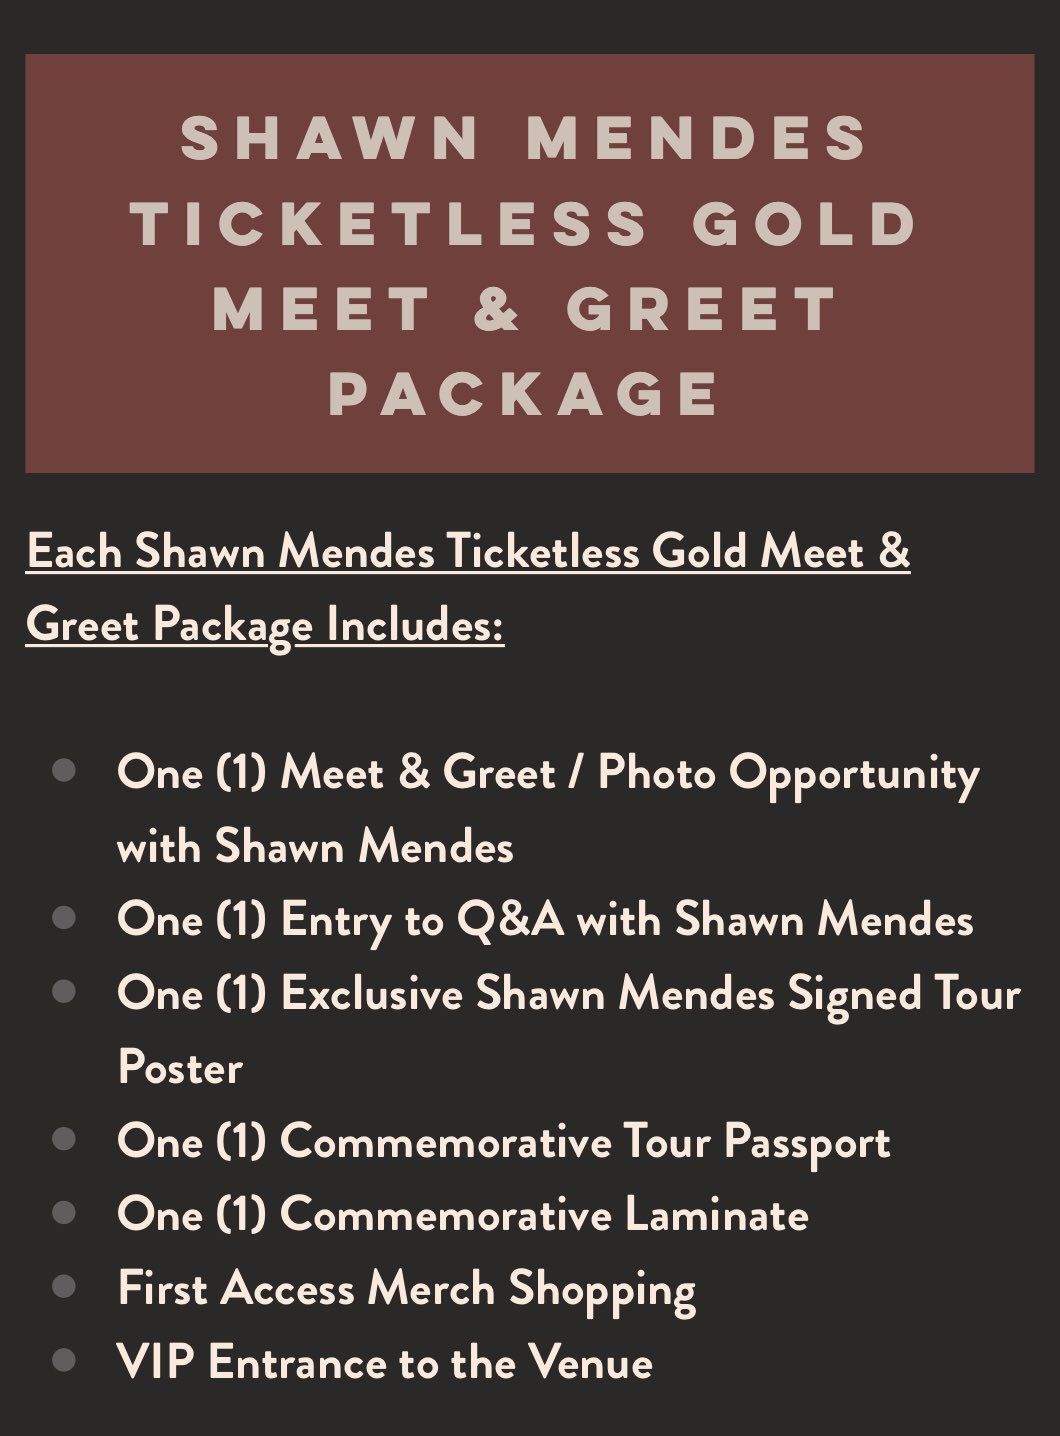 Shawn Mendes Updates On Twitter Ticketless Vip Upgrades These Upgrades Will Go On Sale On Wednesday Feb 13th At 4pm Local You Must Have A Ticket To Purchase Please Visit